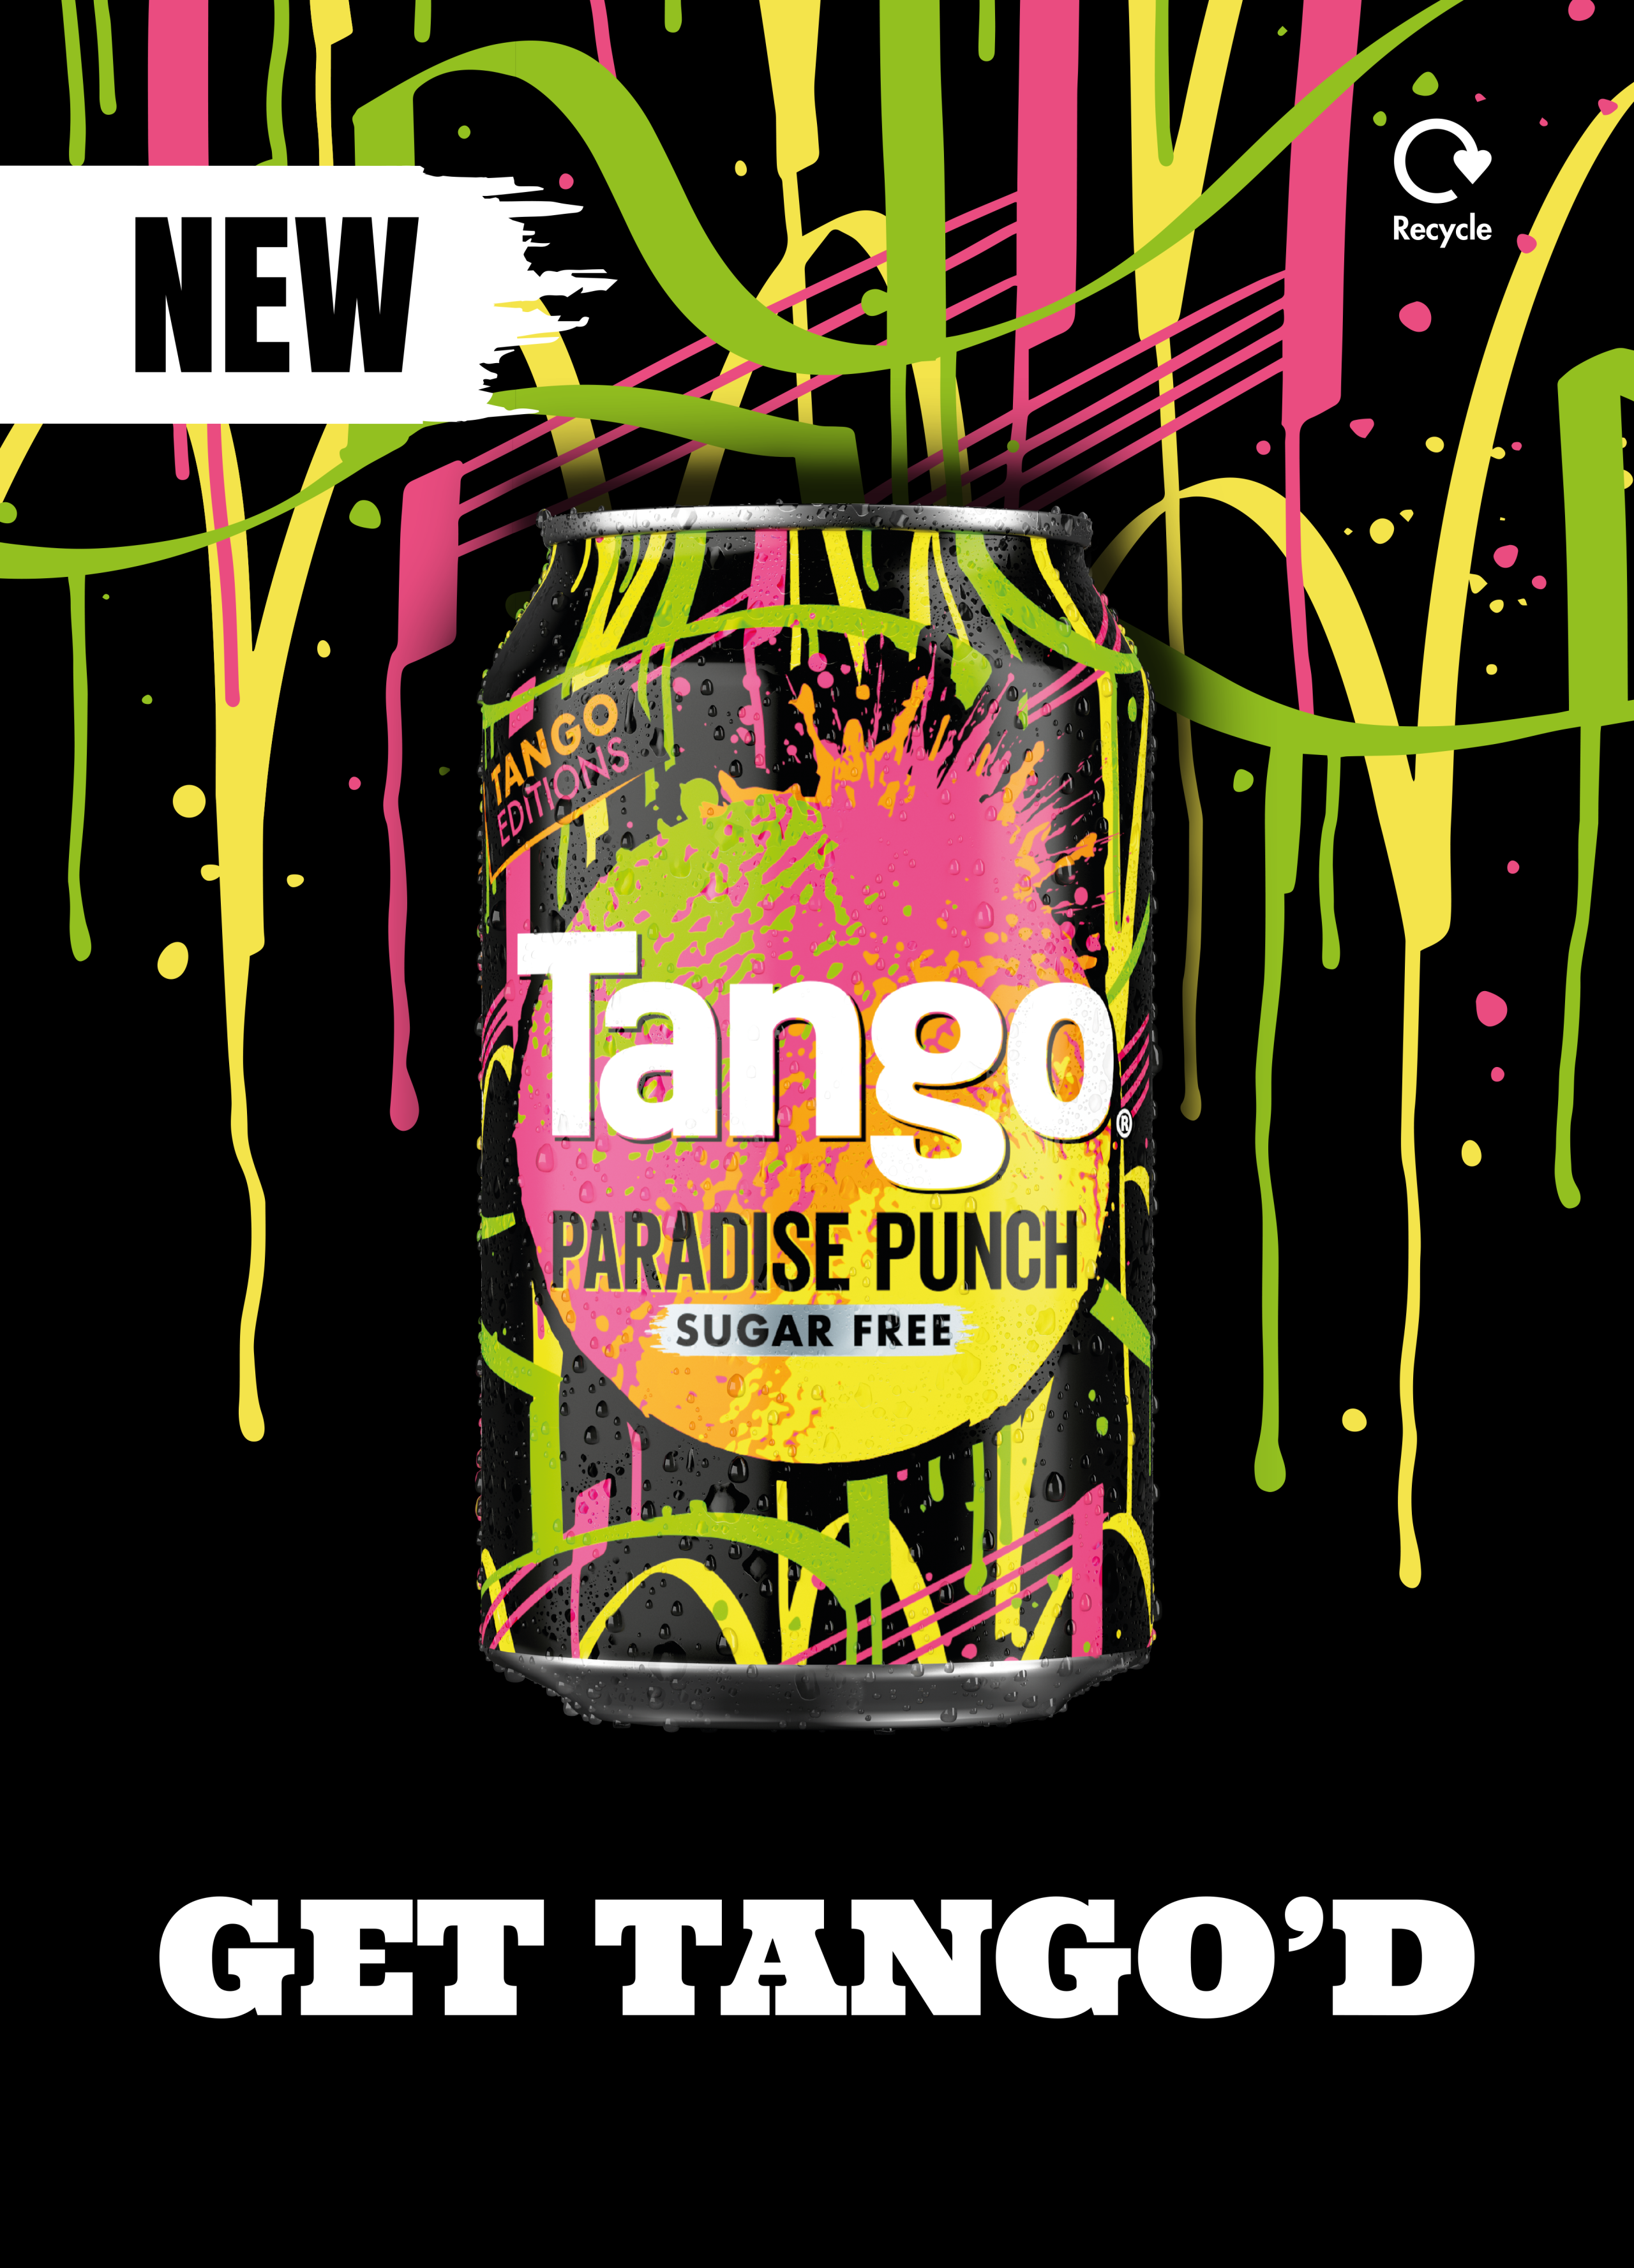 Tango releases bold new ‘Editions’ flavour – Paradise Punch Sugar Free